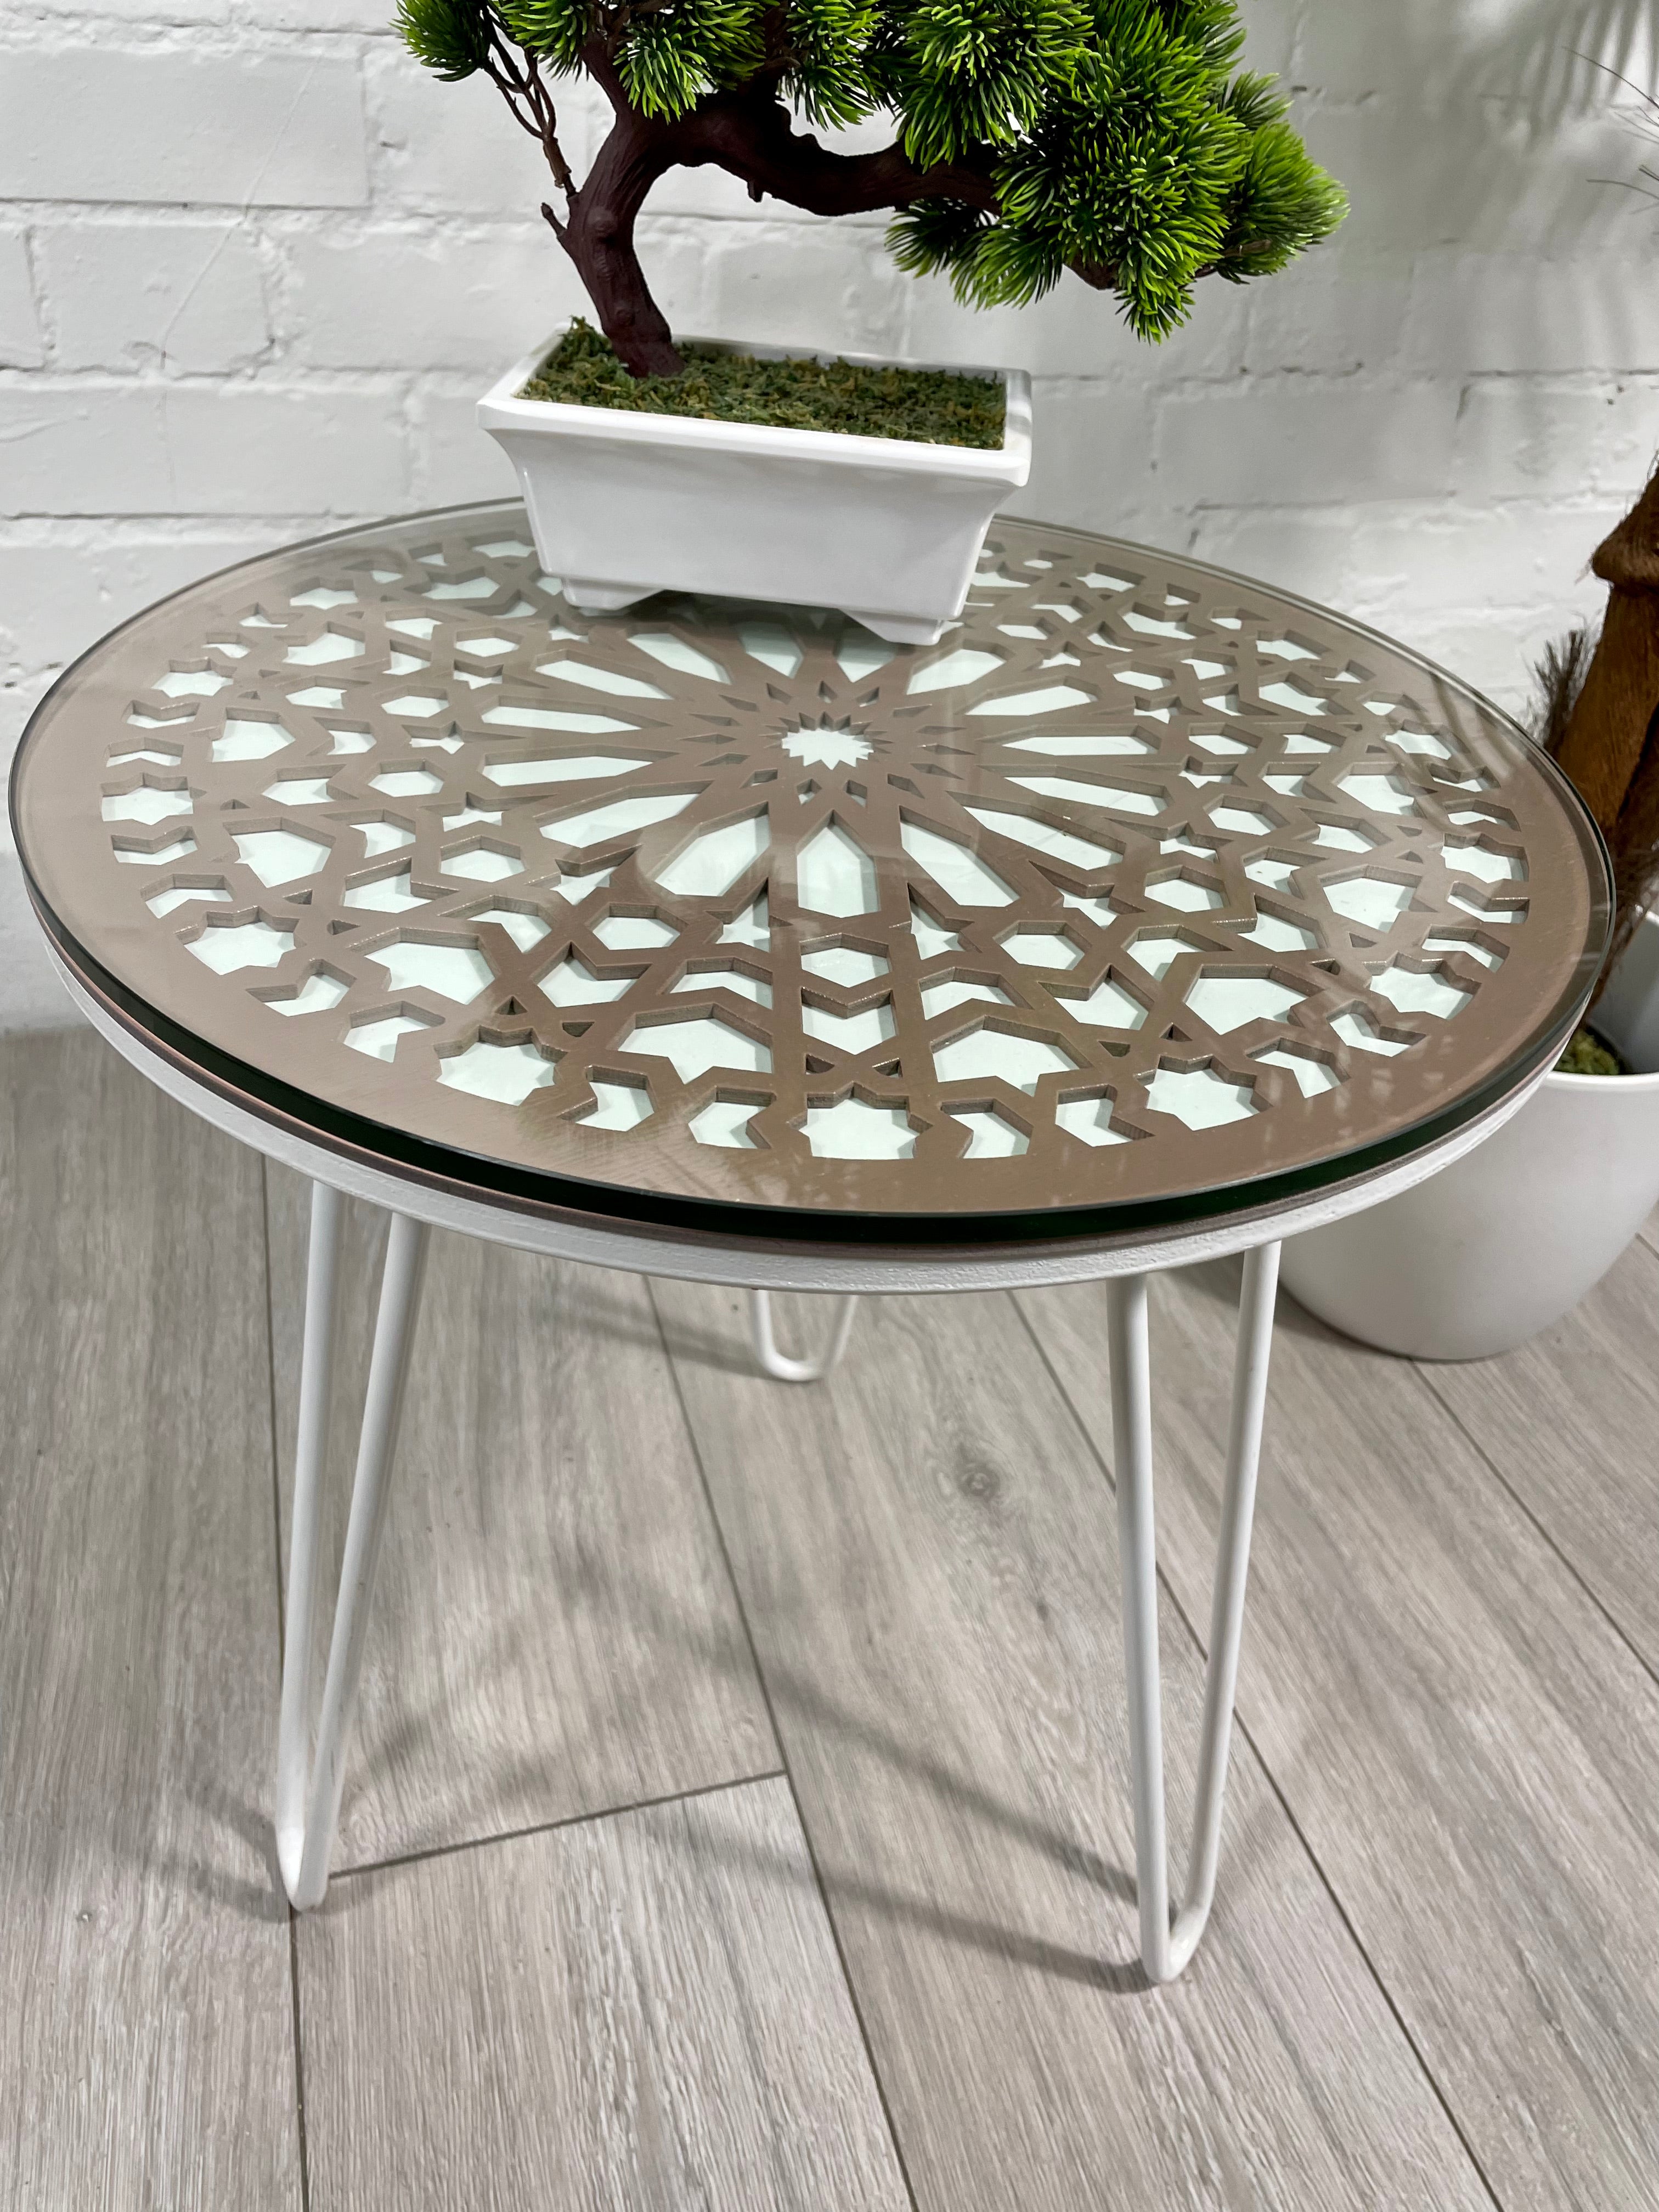 Moroccan Mosaic Side Table Pin Legs | Zellige Table White and Dusty Pink with Glass Top